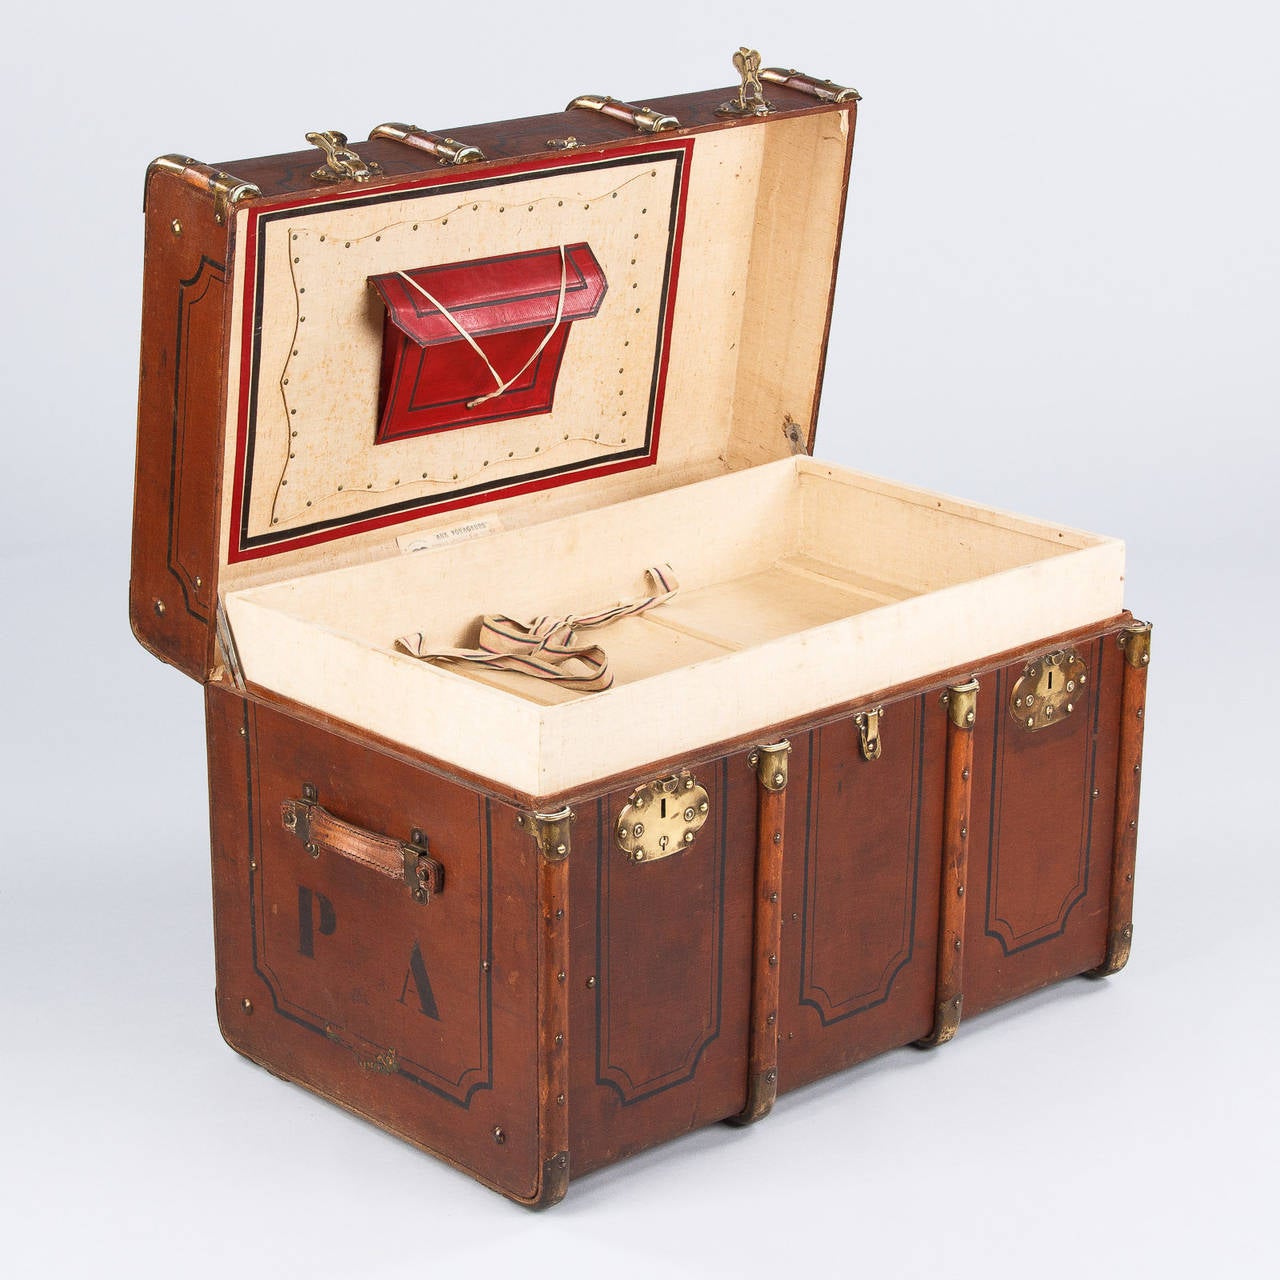 A great French traveling trunk made by 